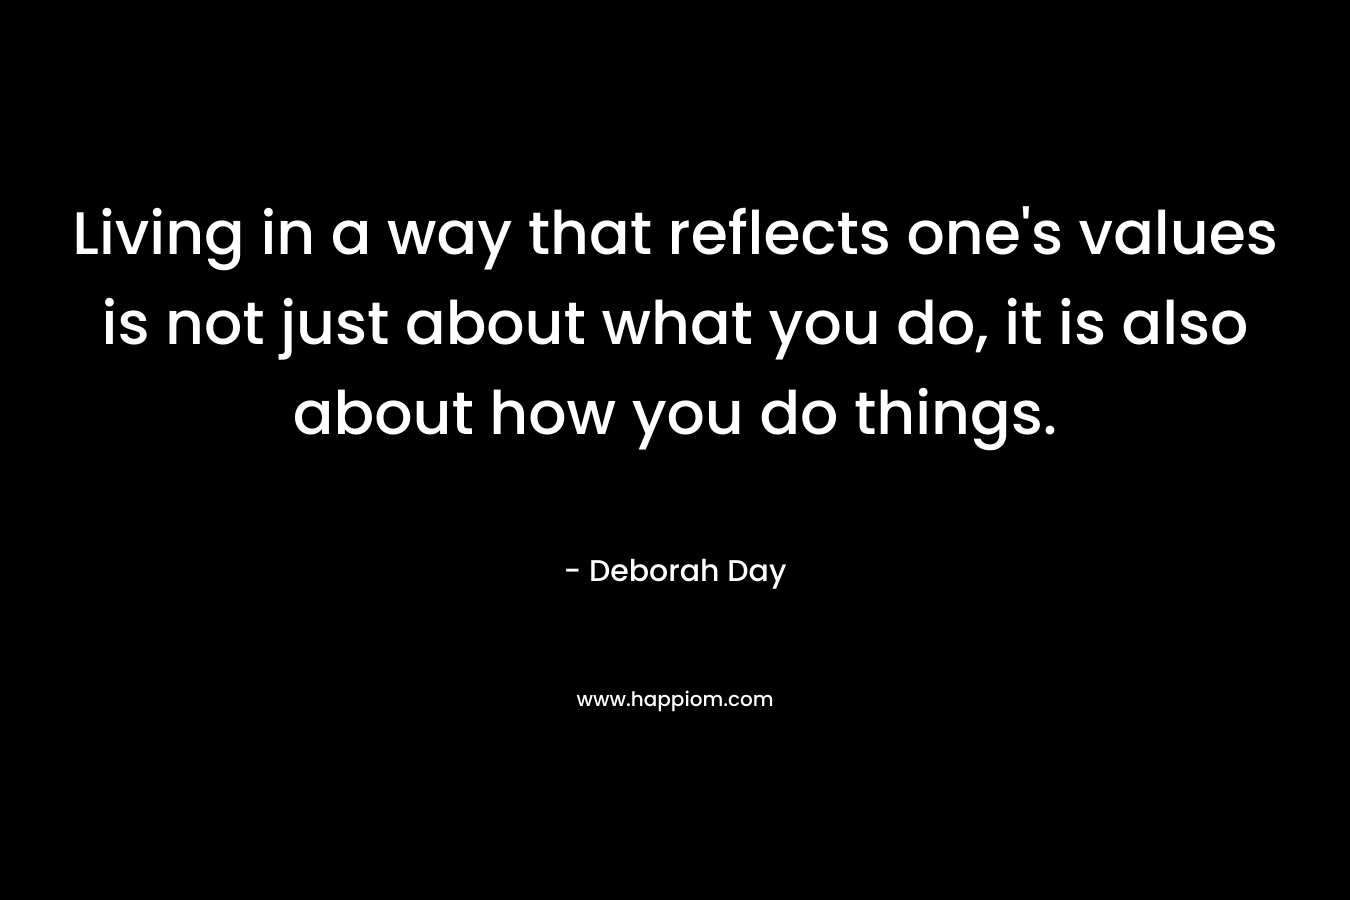 Living in a way that reflects one’s values is not just about what you do, it is also about how you do things. – Deborah Day